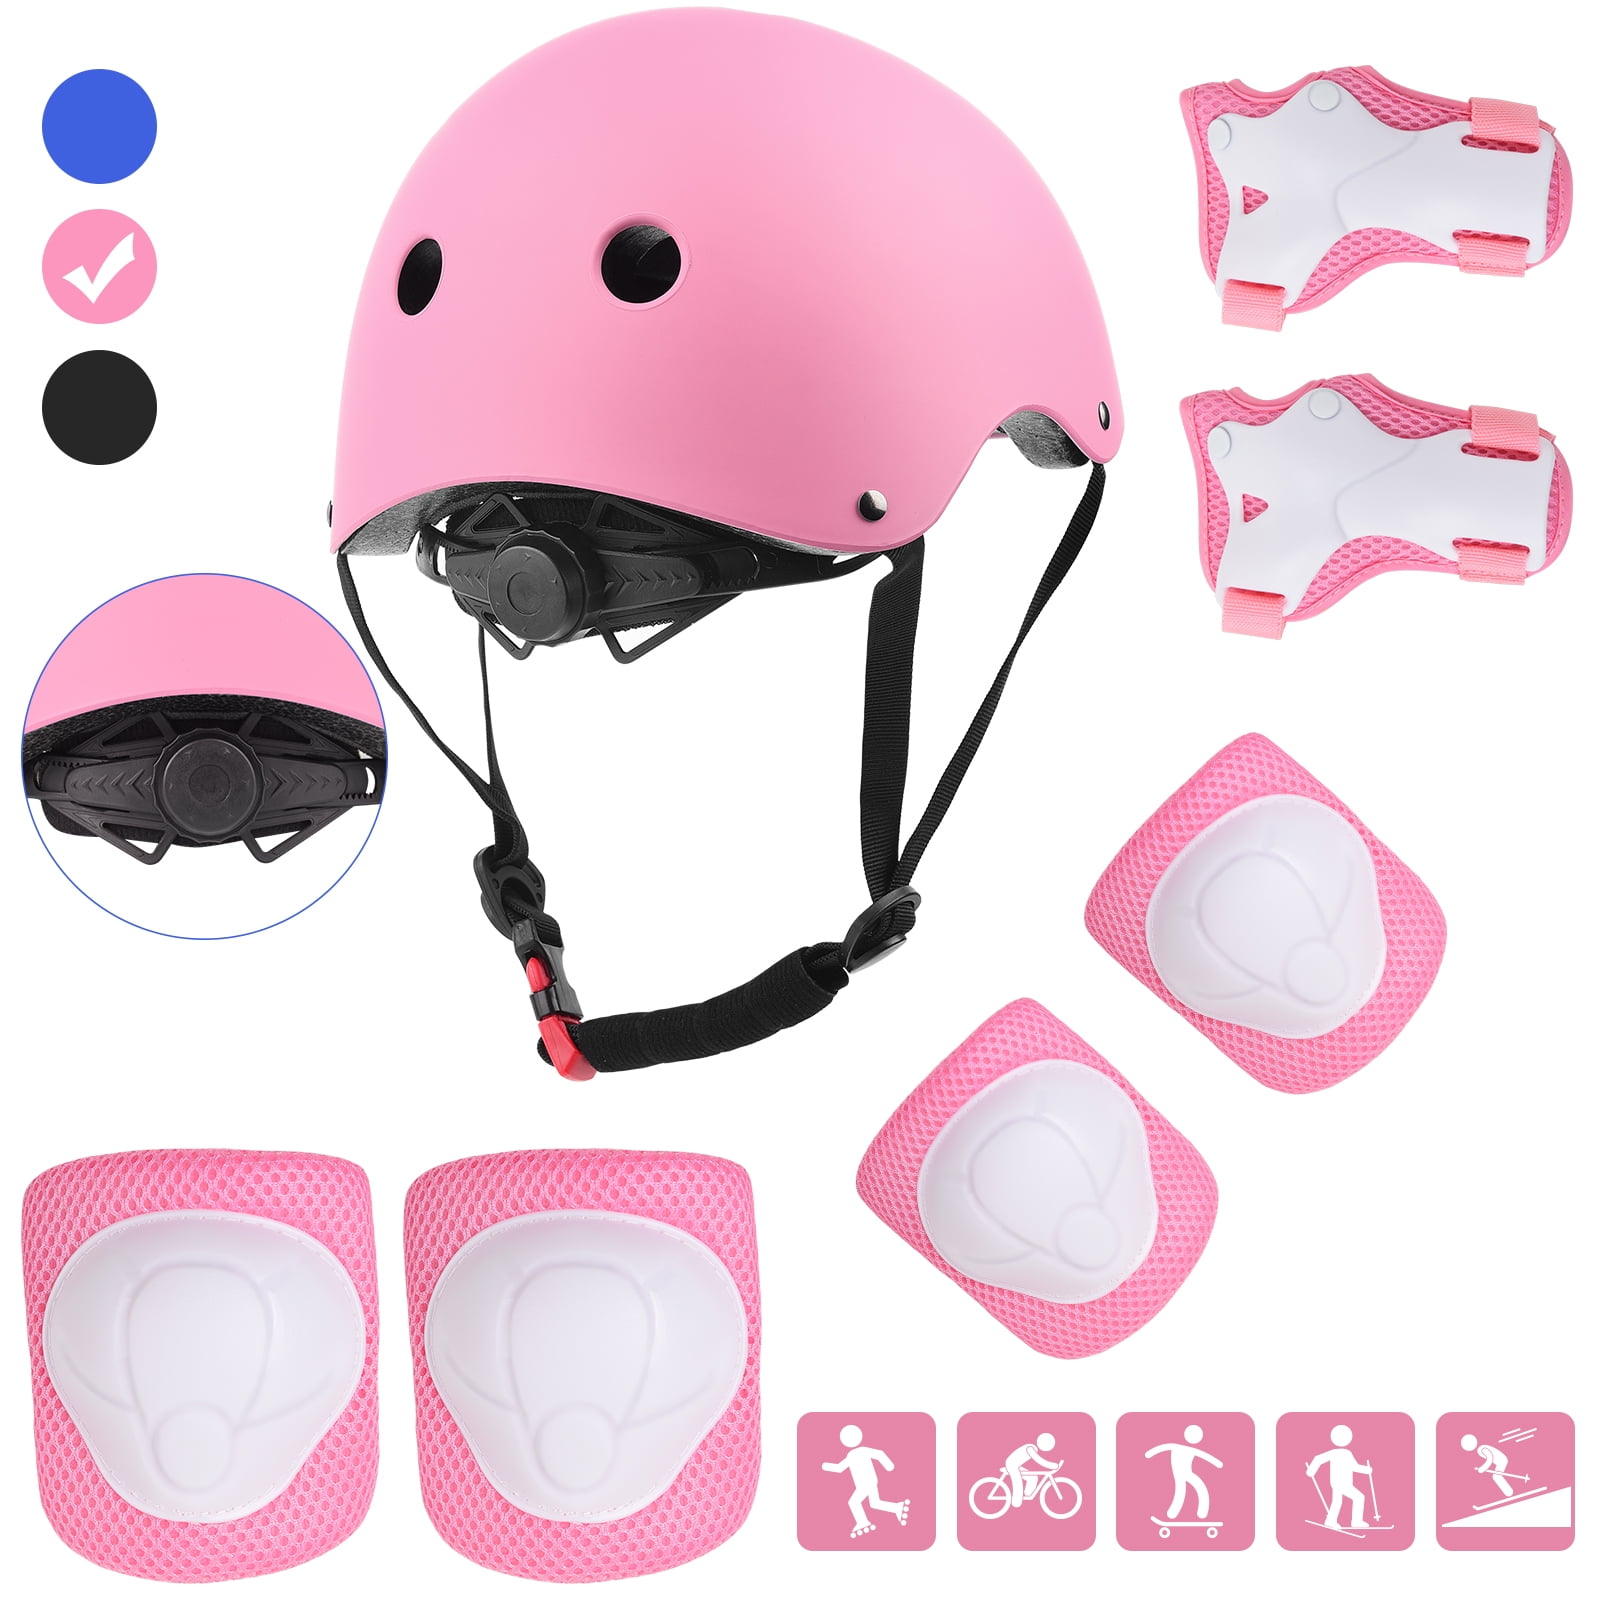 7Pcs Soft Protective Gear Outfit Kids Helmet with Knee Wrist Guard Elbow Pad Set 